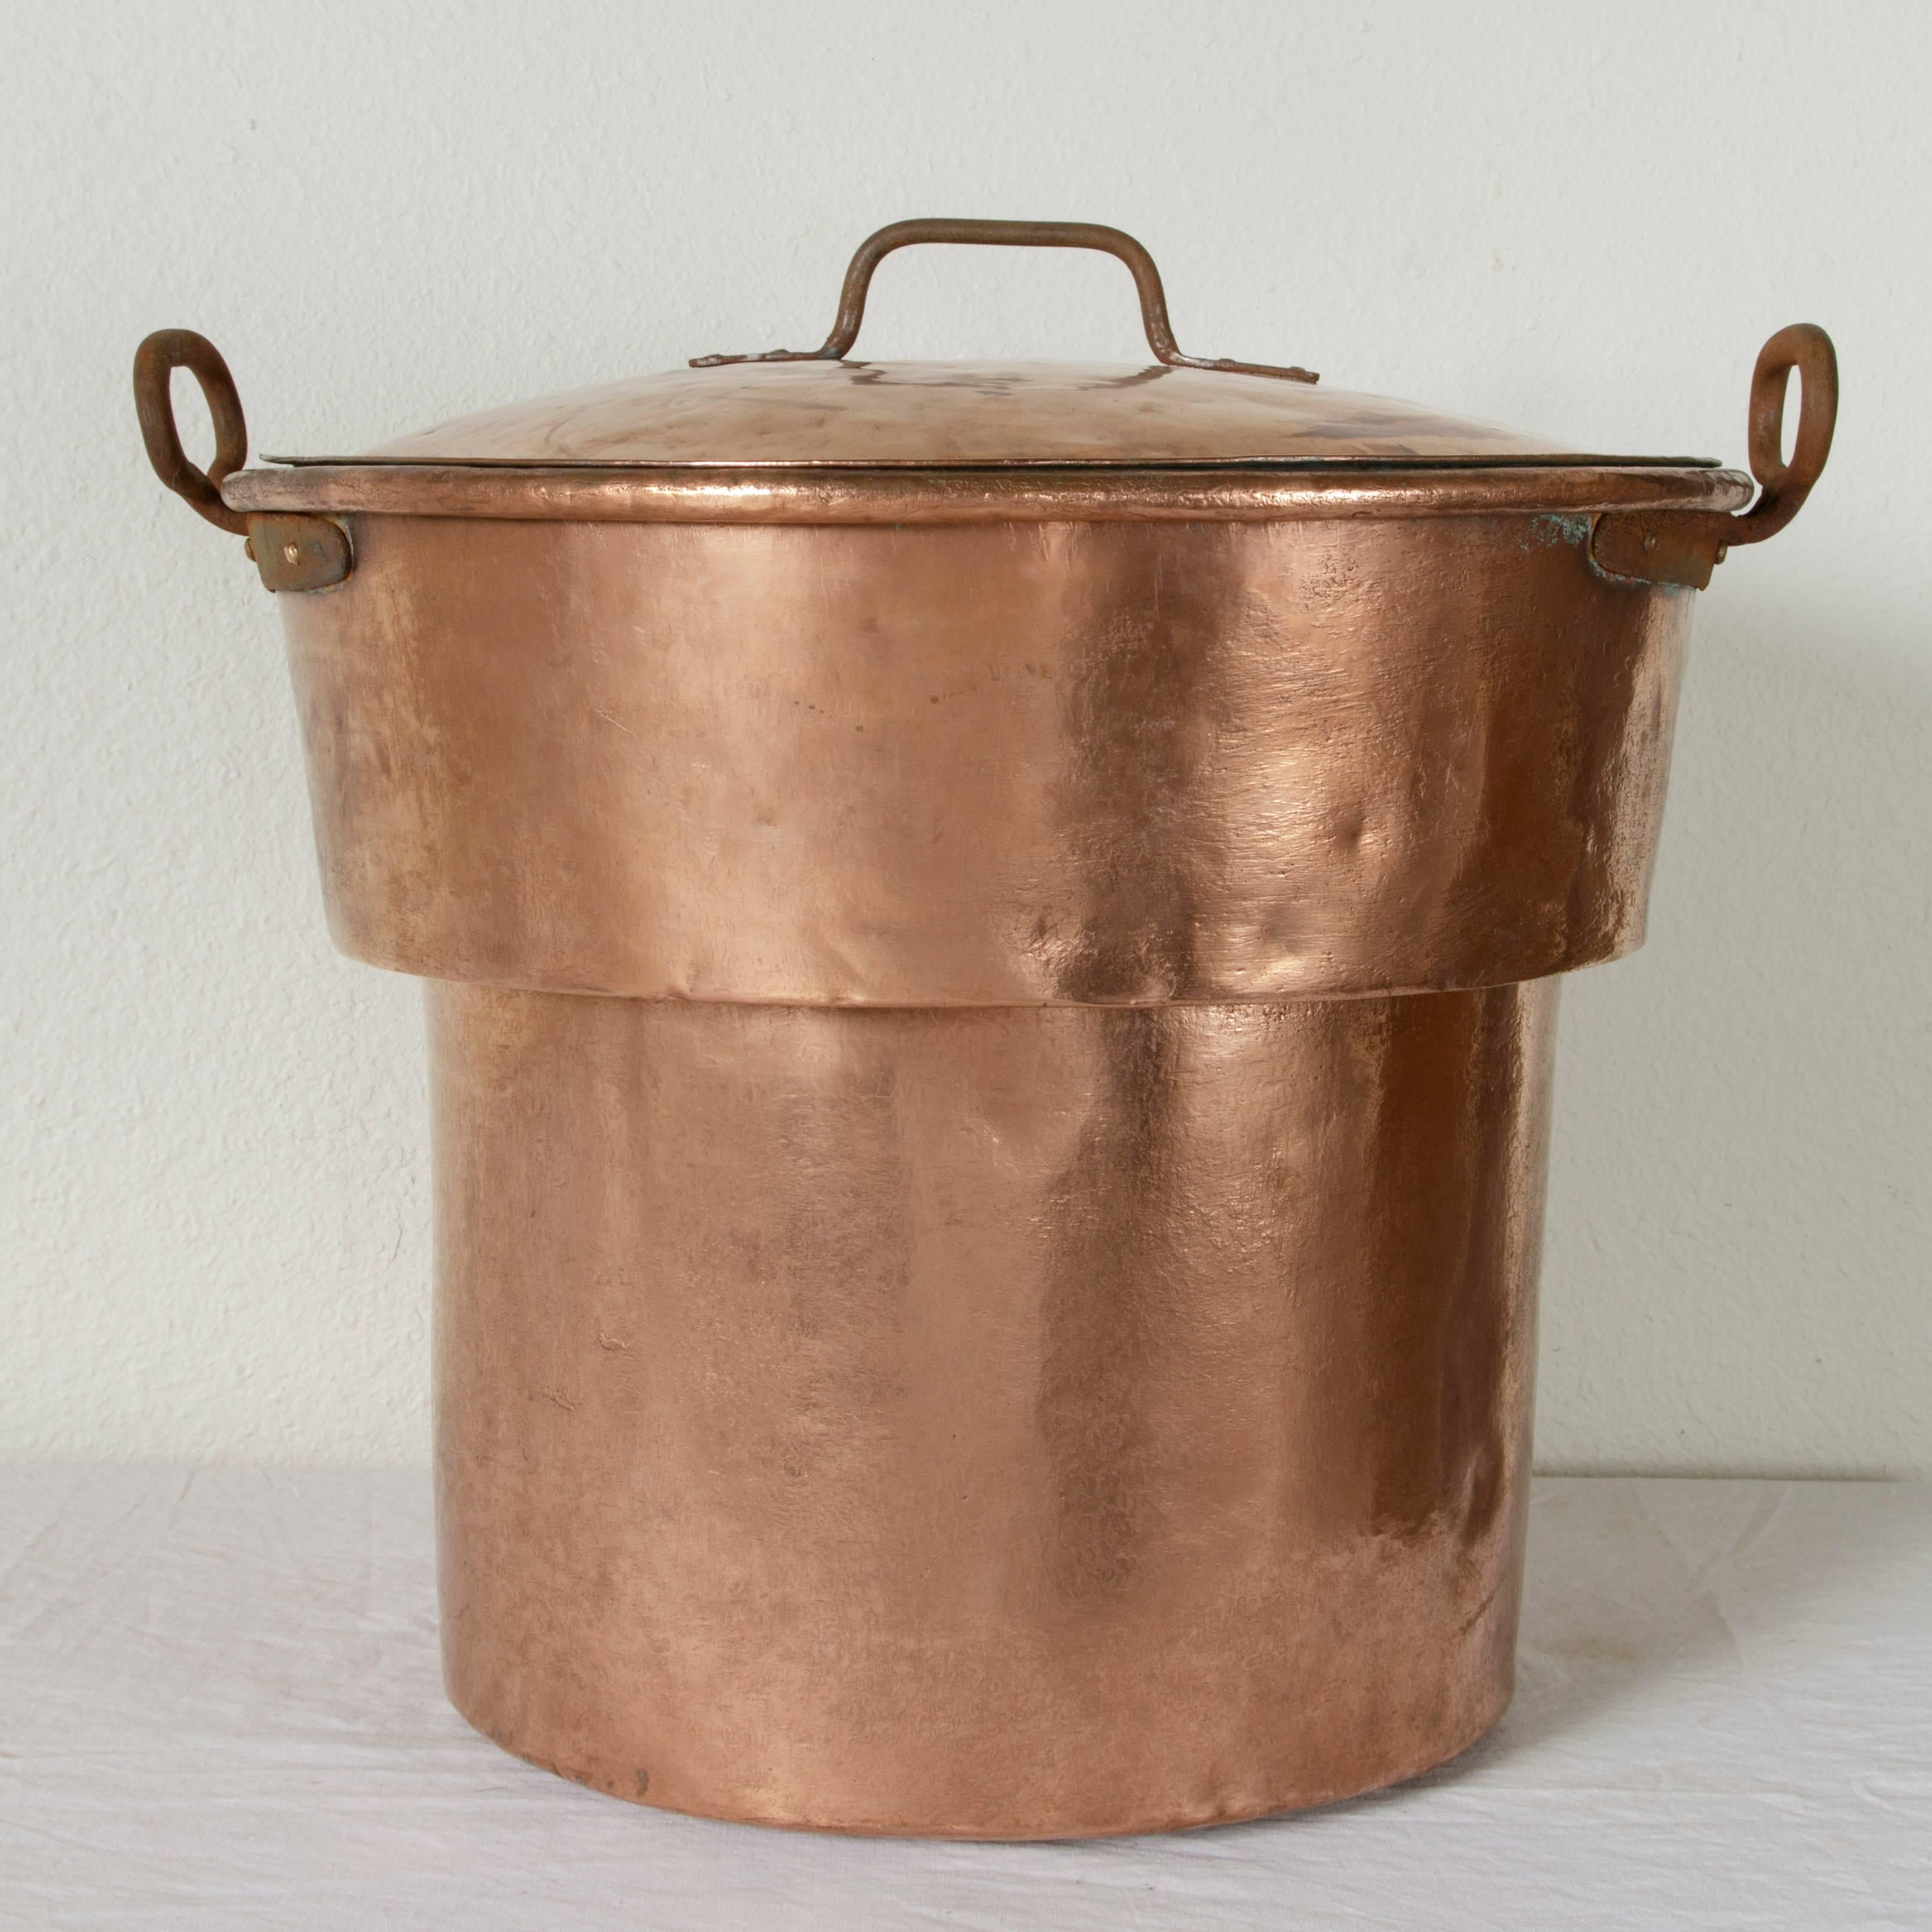 From the Cantal region of France, this very large nineteenth century copper stock pot with lid was originally used for heating milk in the cheese making process. Iron handles on the sides of the pot and on the lid allow for it to be carried with